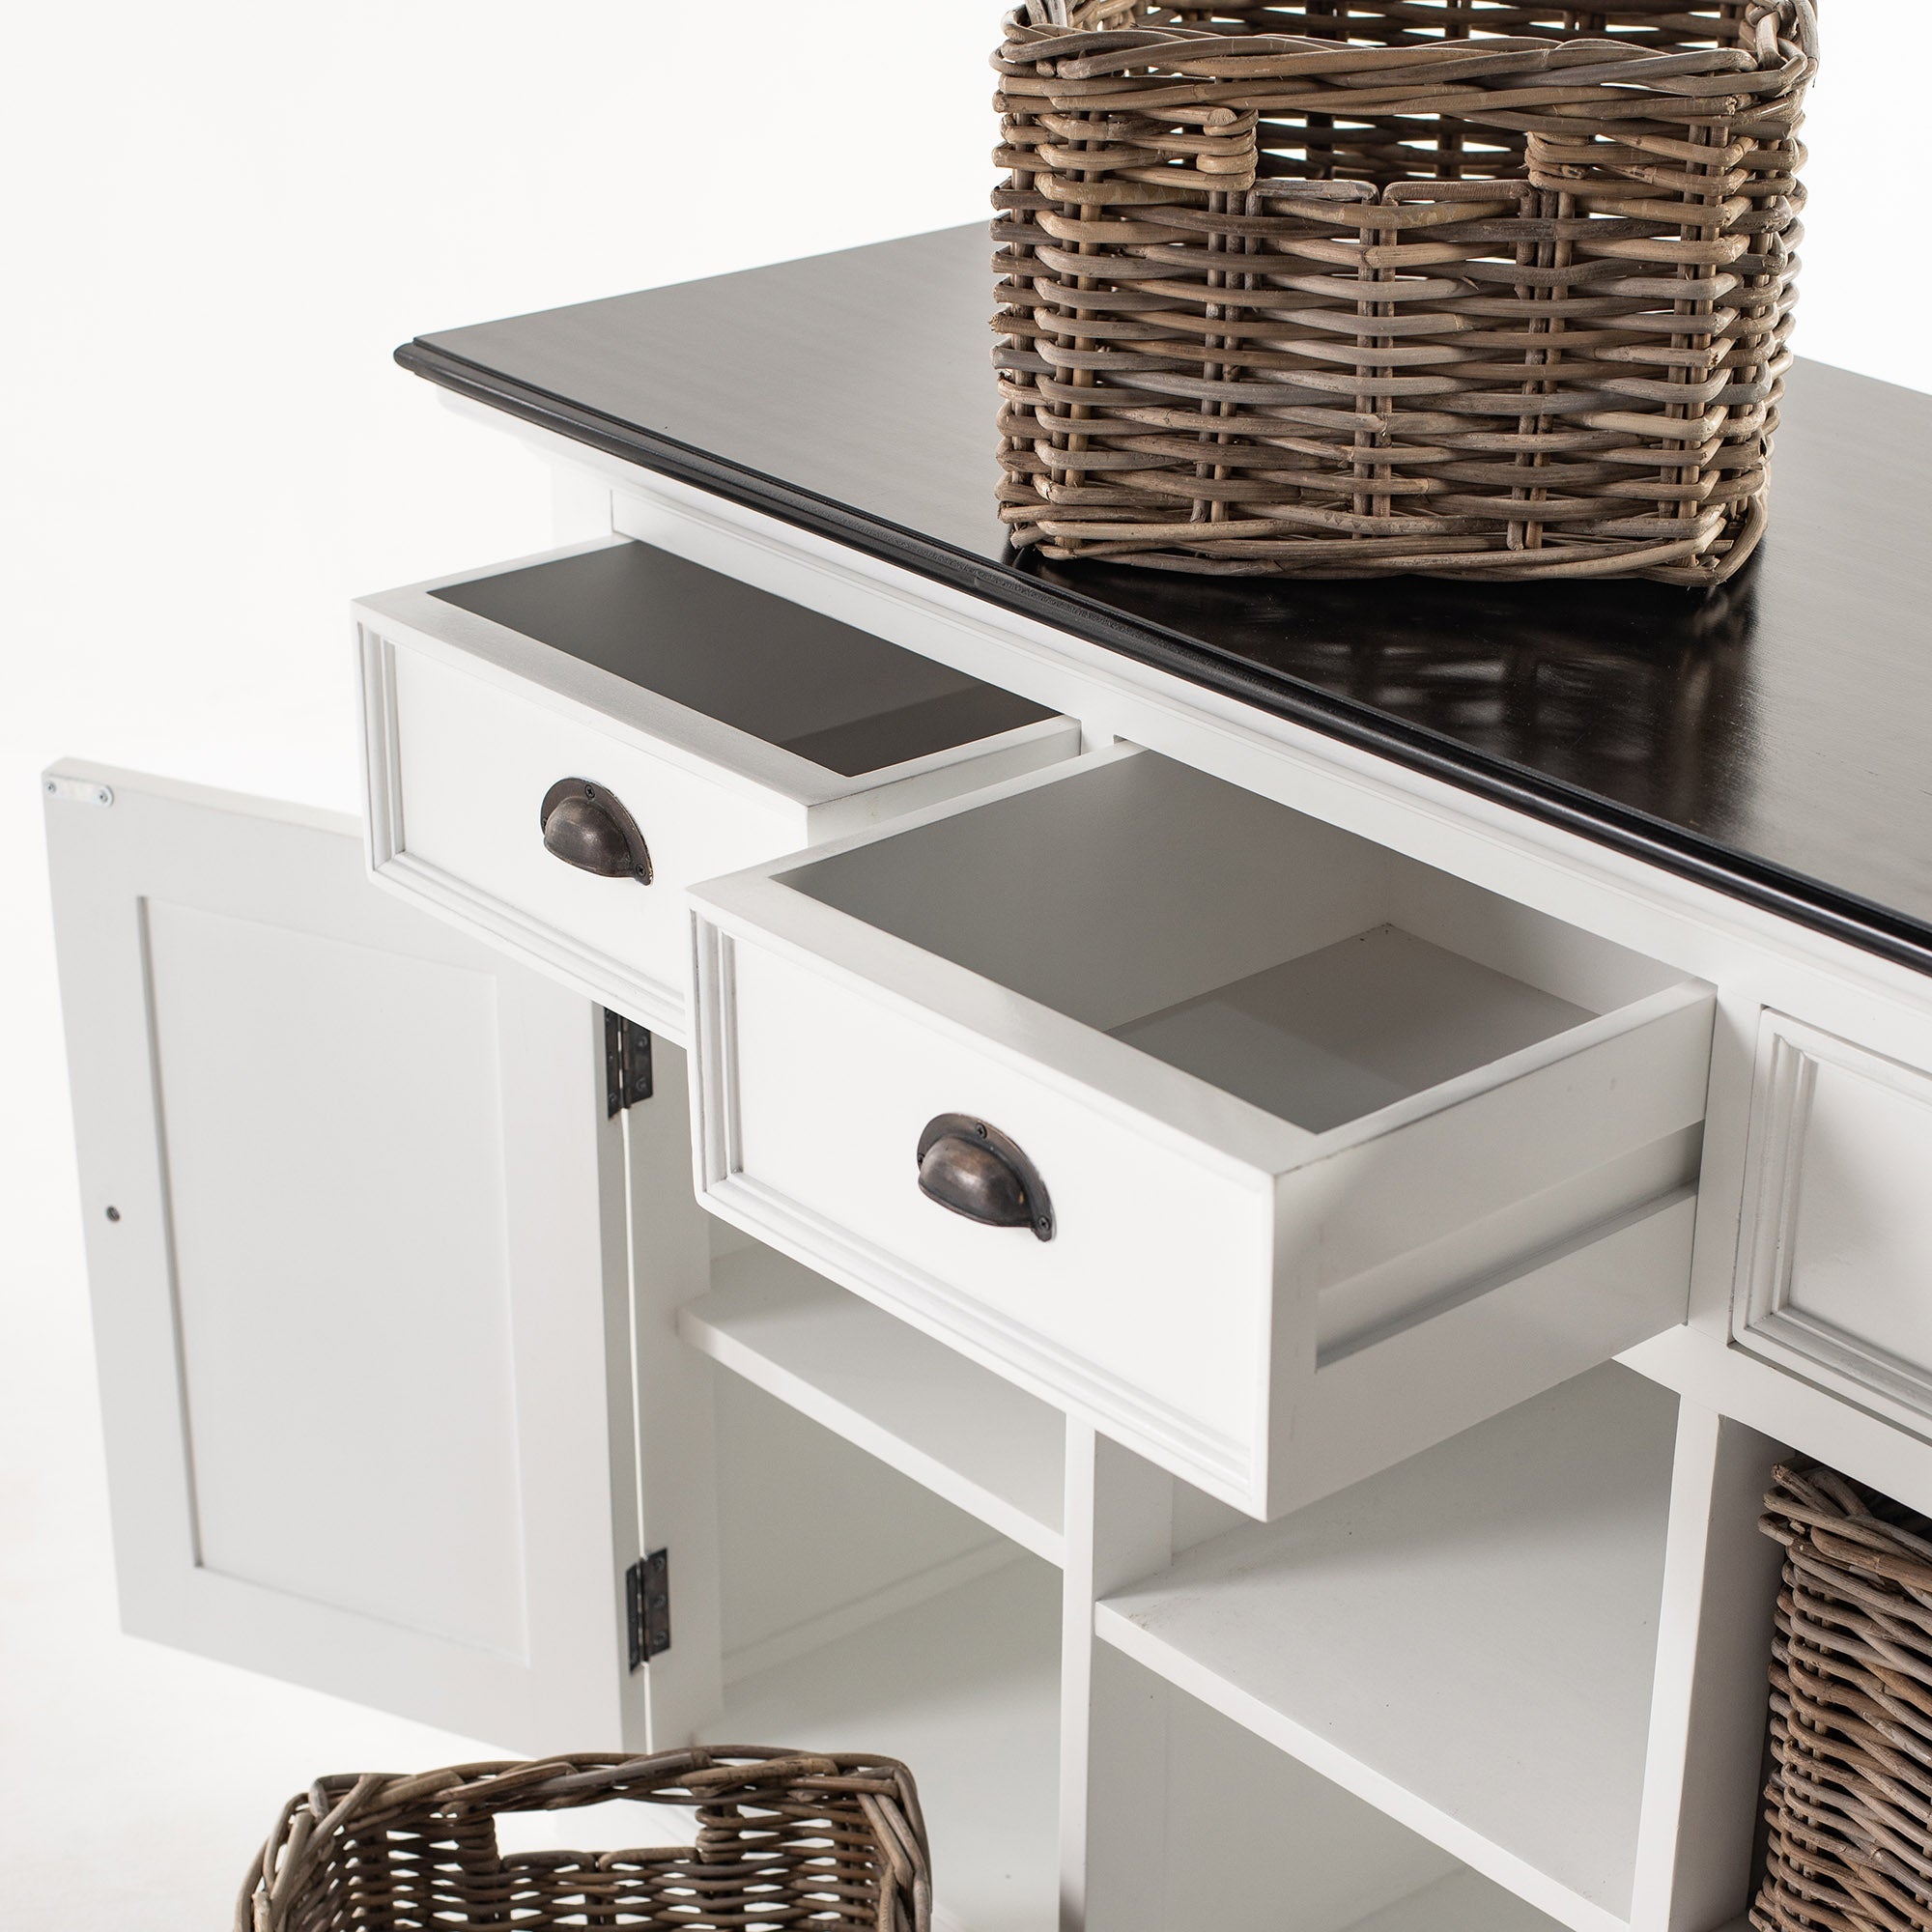 Halifax Contrast Farmhouse White & Black Buffet with 4 Baskets